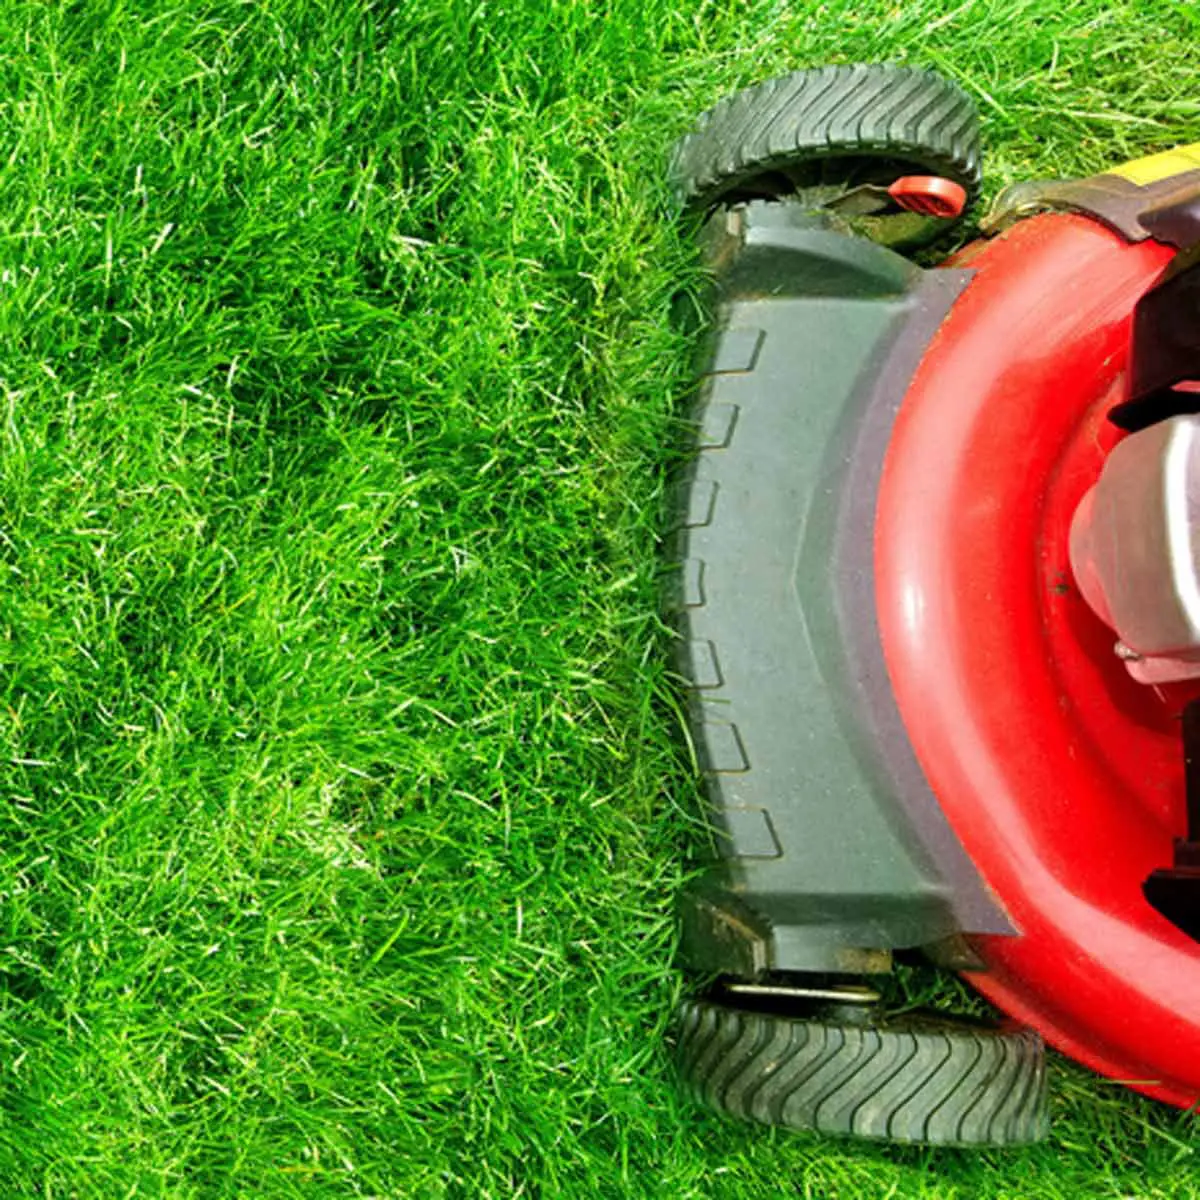 10 Lawn Care Myths You Really Need To Stop Believing